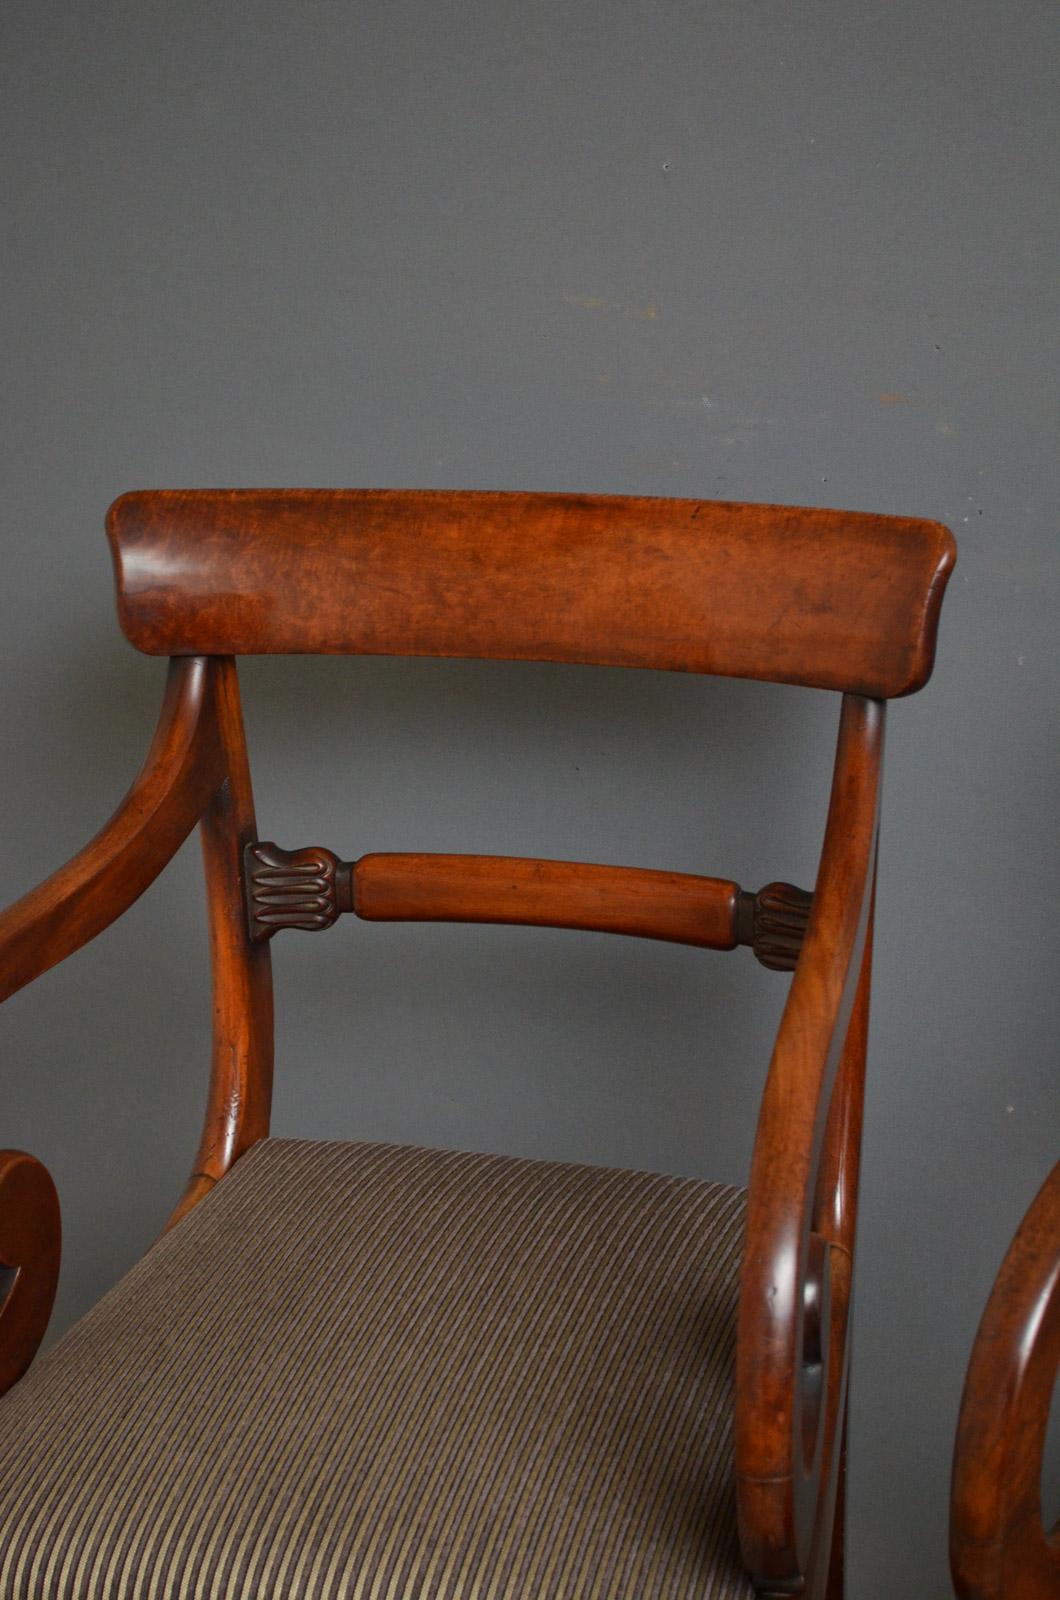 Pair of Regency Carver Chairs in Mahogany (Englisch)